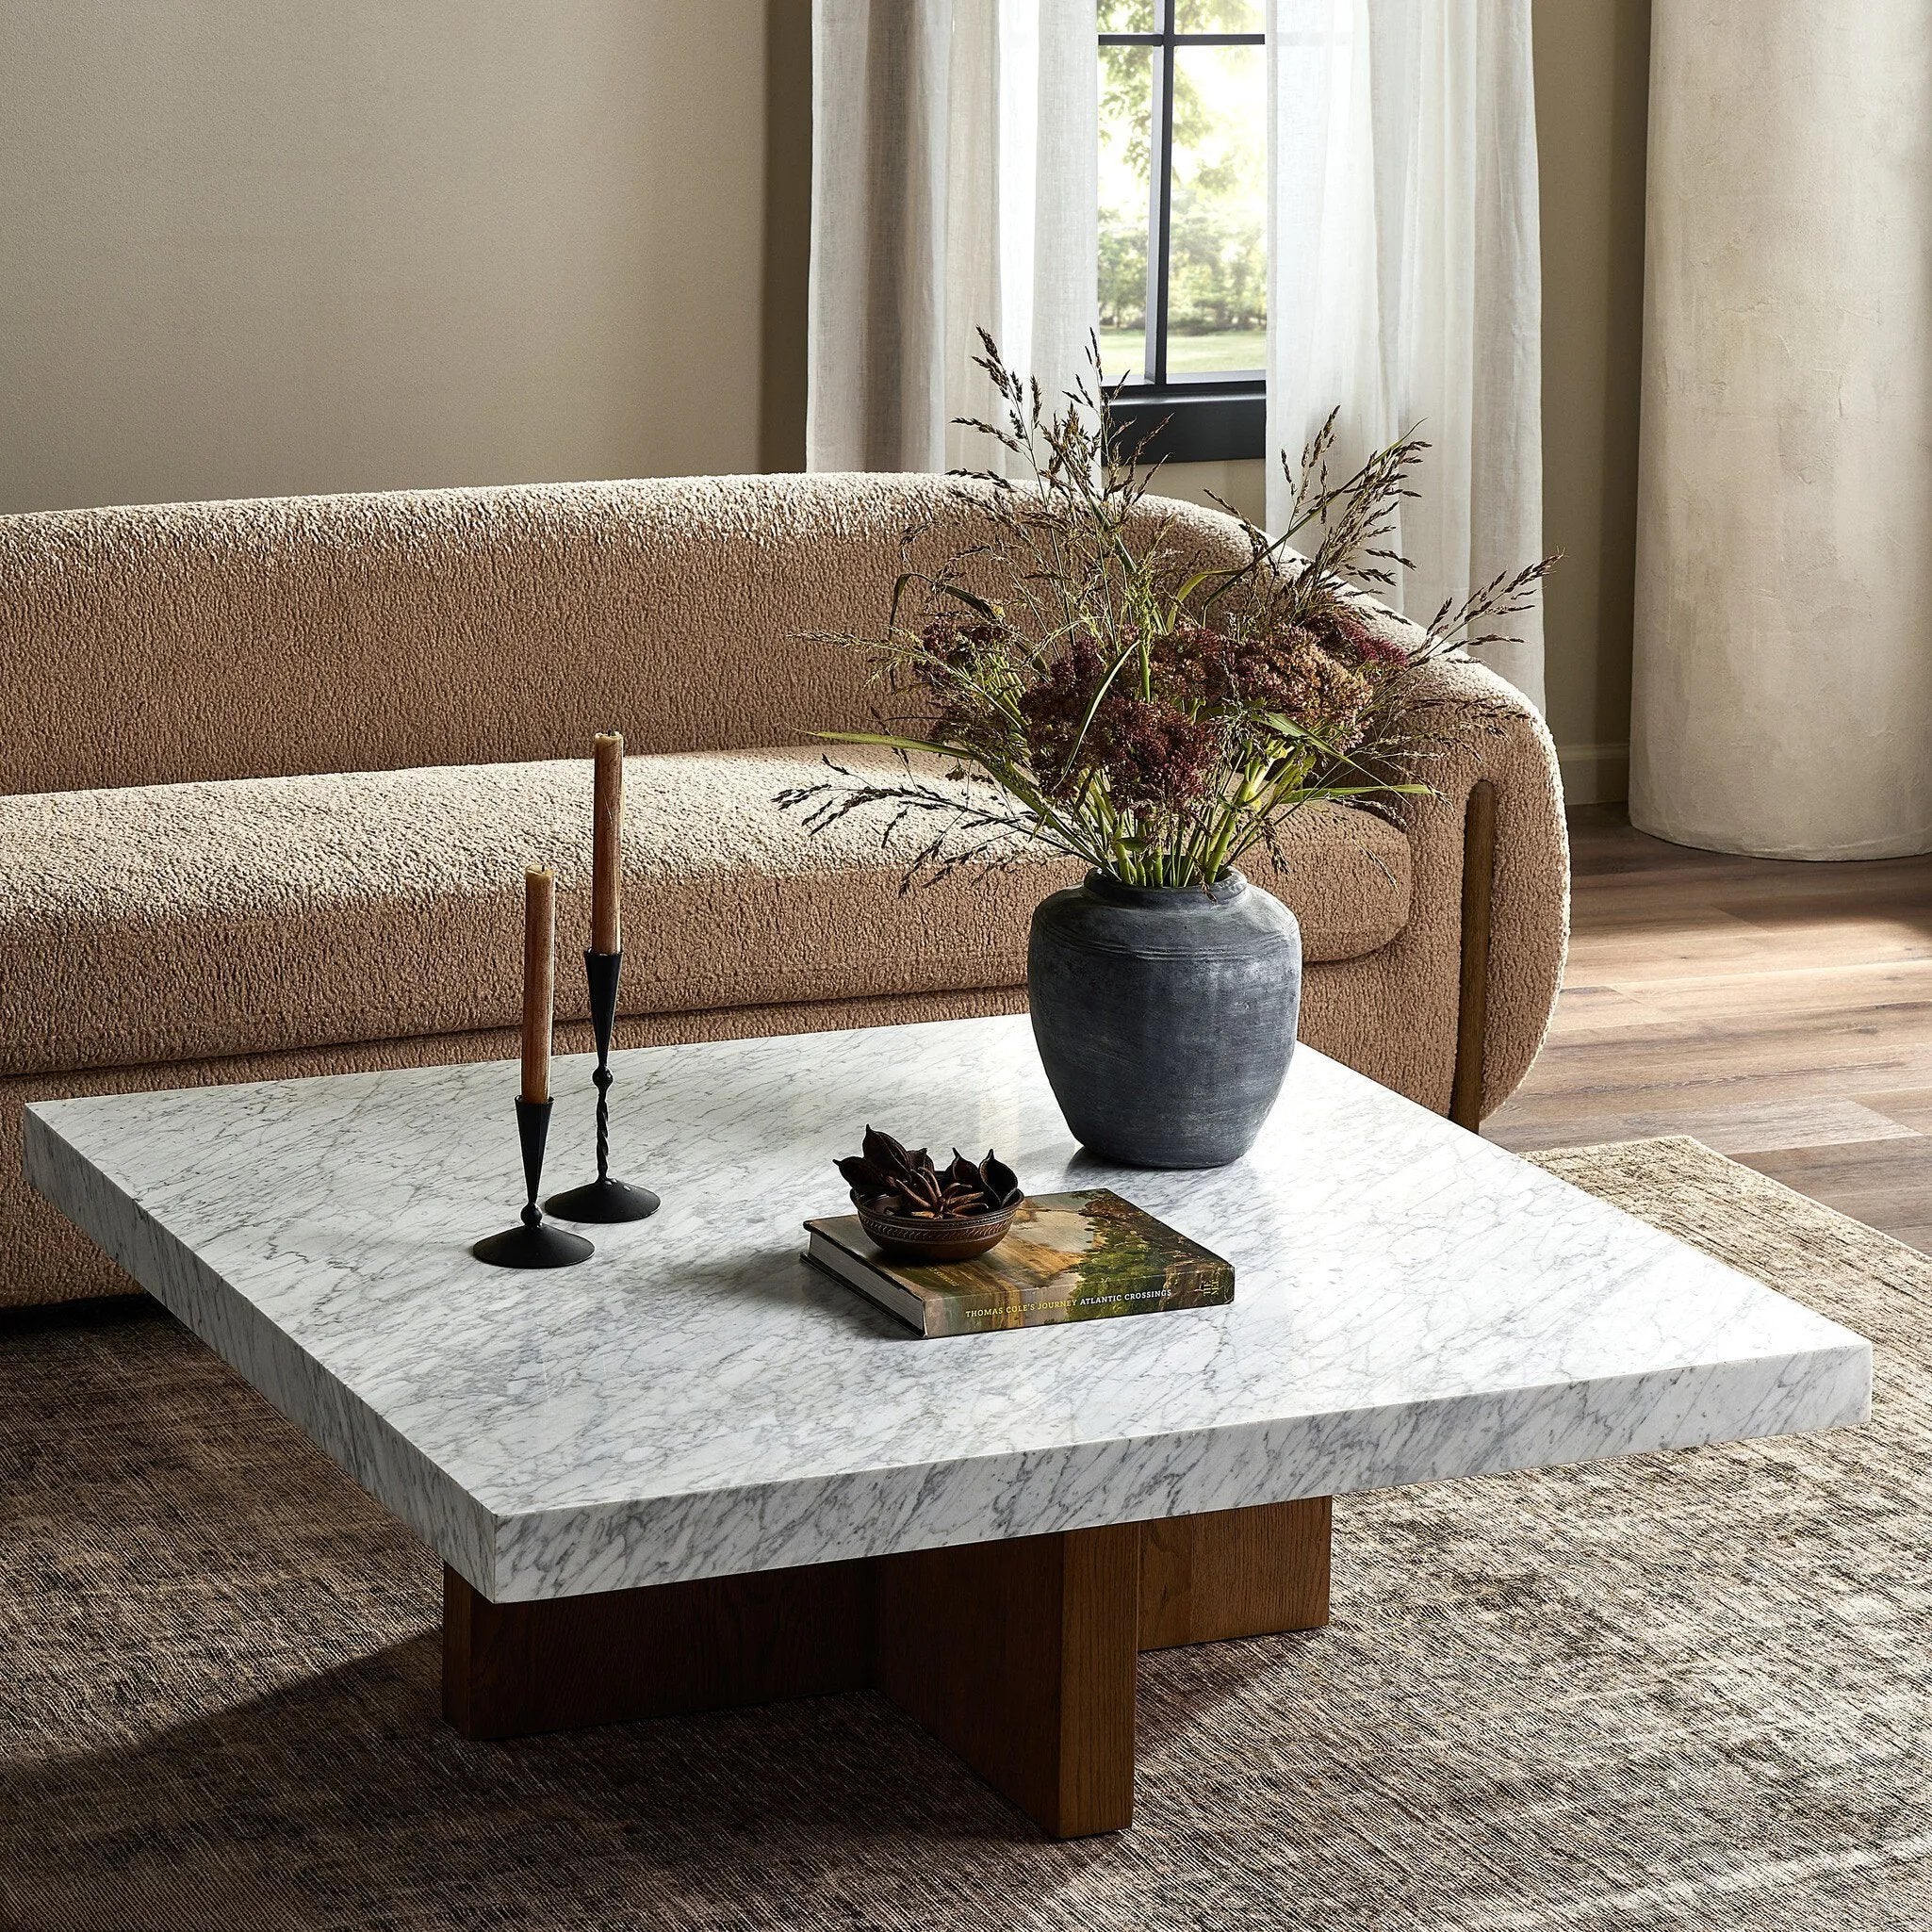 Structured lines and wide proportions fuse for a mixed material coffee table of smoked oak and polished marble.Collection: Hughe Amethyst Home provides interior design, new home construction design consulting, vintage area rugs, and lighting in the Monterey metro area.